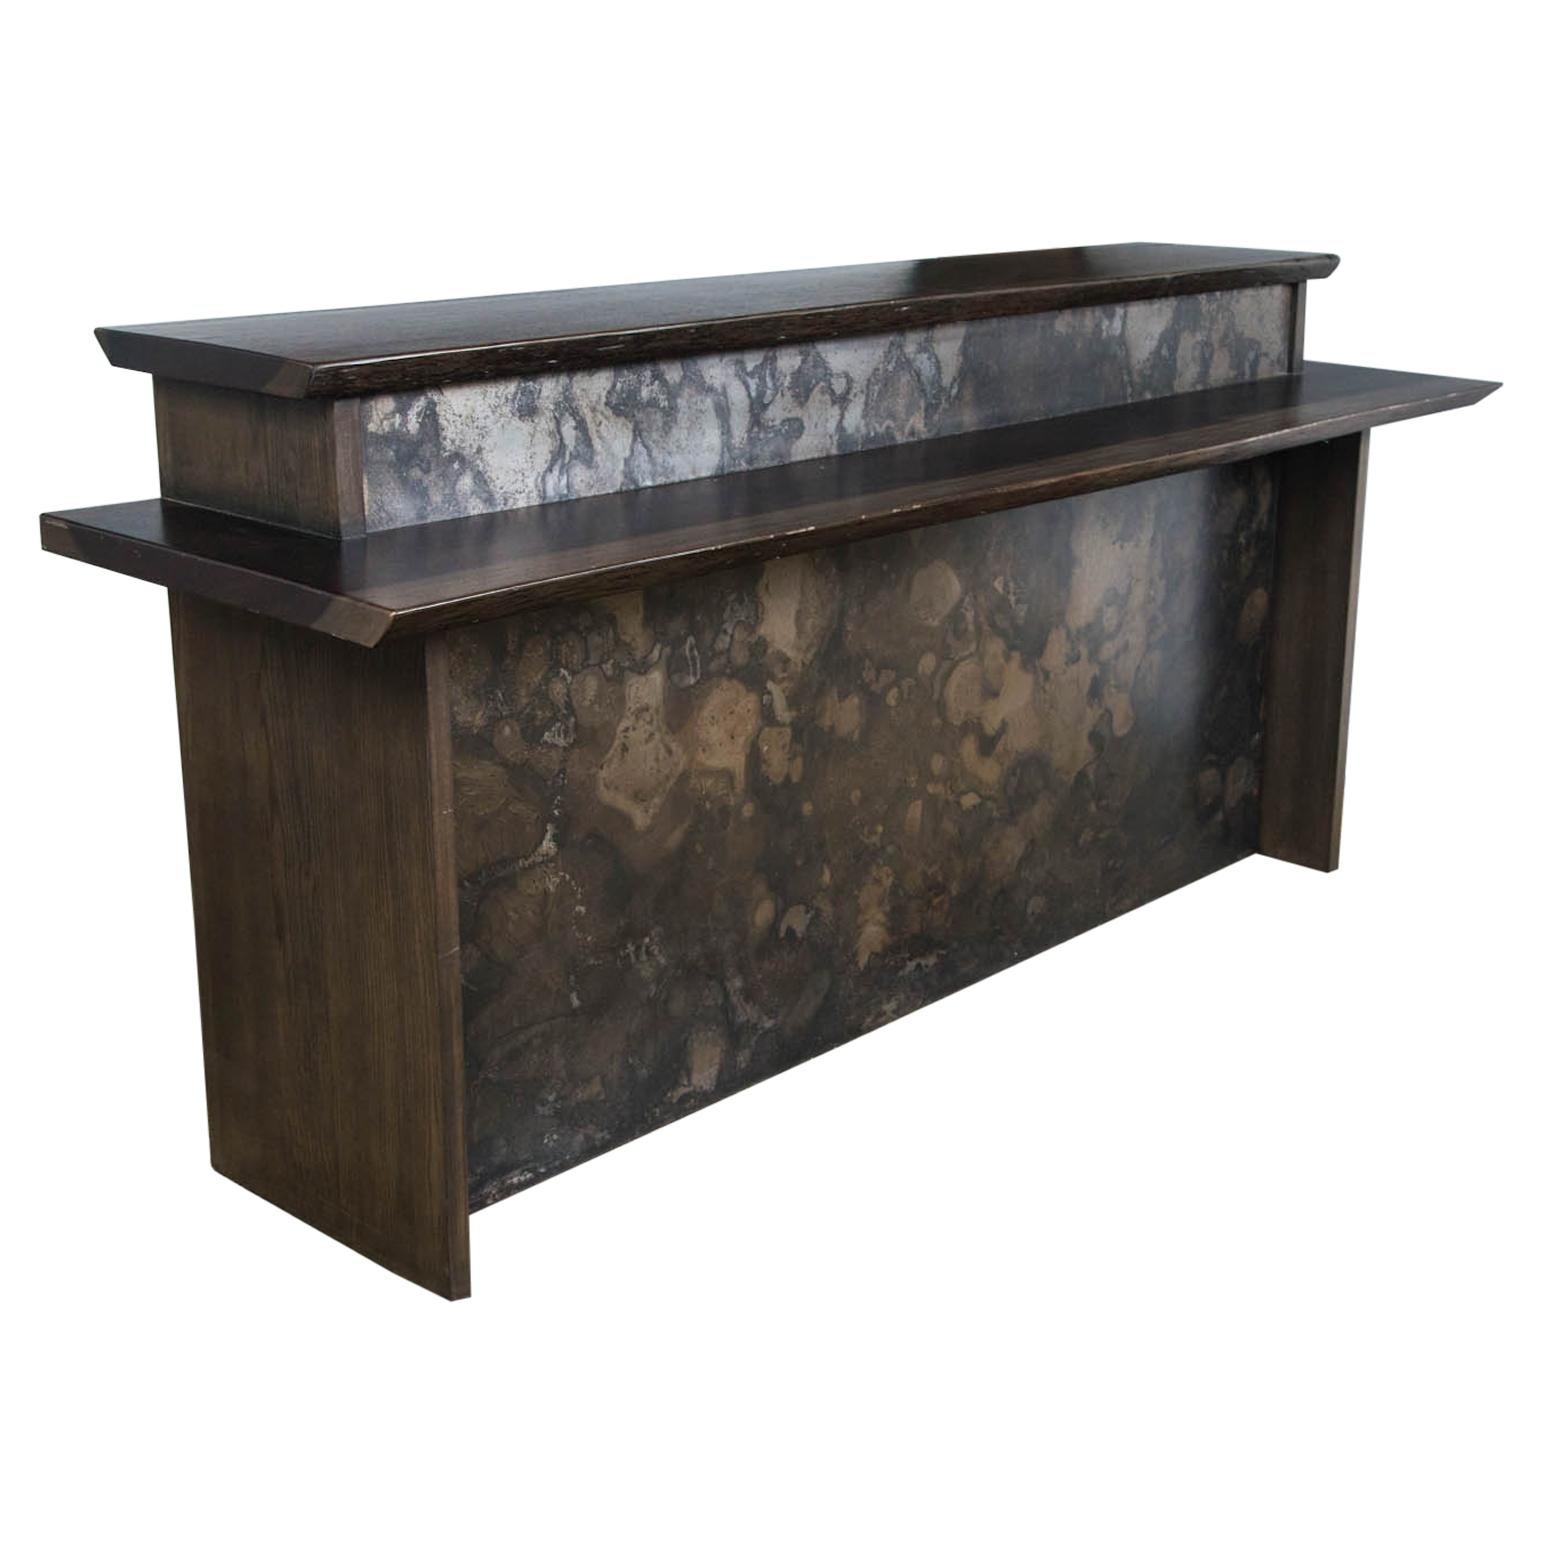 Two-Tier Live Edge Wood and Metal Bar For Sale